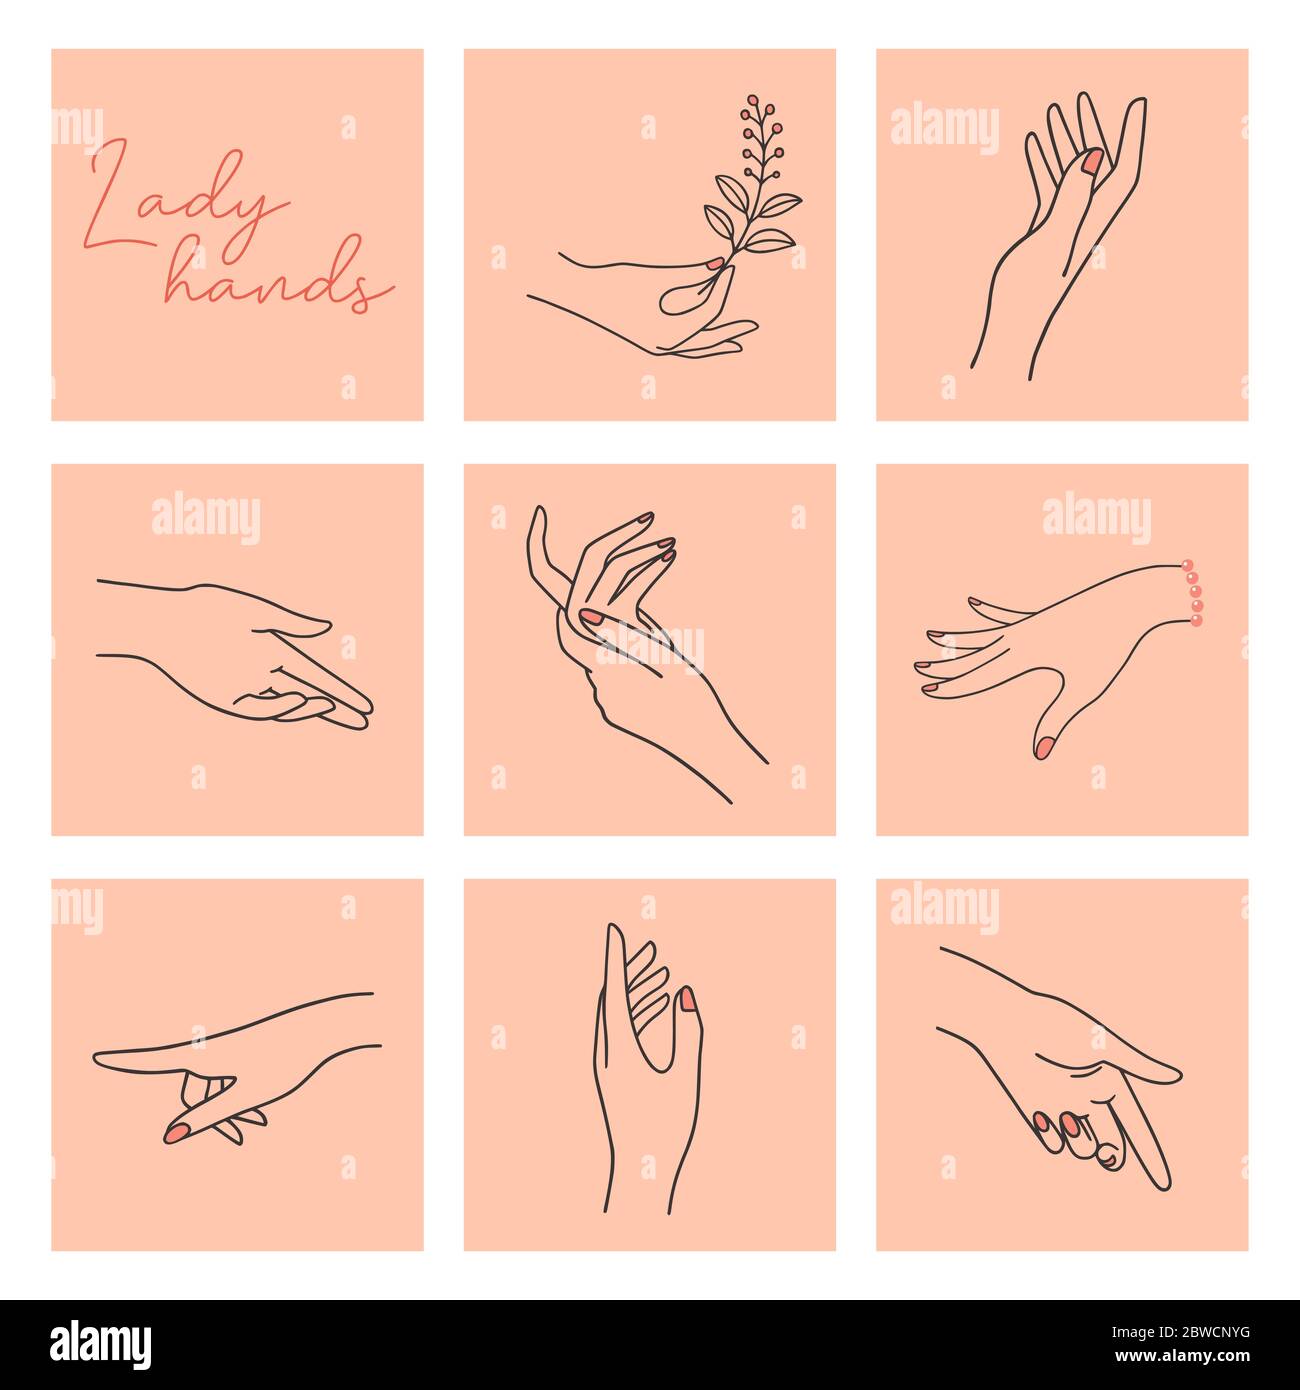 Womens hands with different gestures and in different positions are drawn in a linear style and isolated in the background. Stock Vector